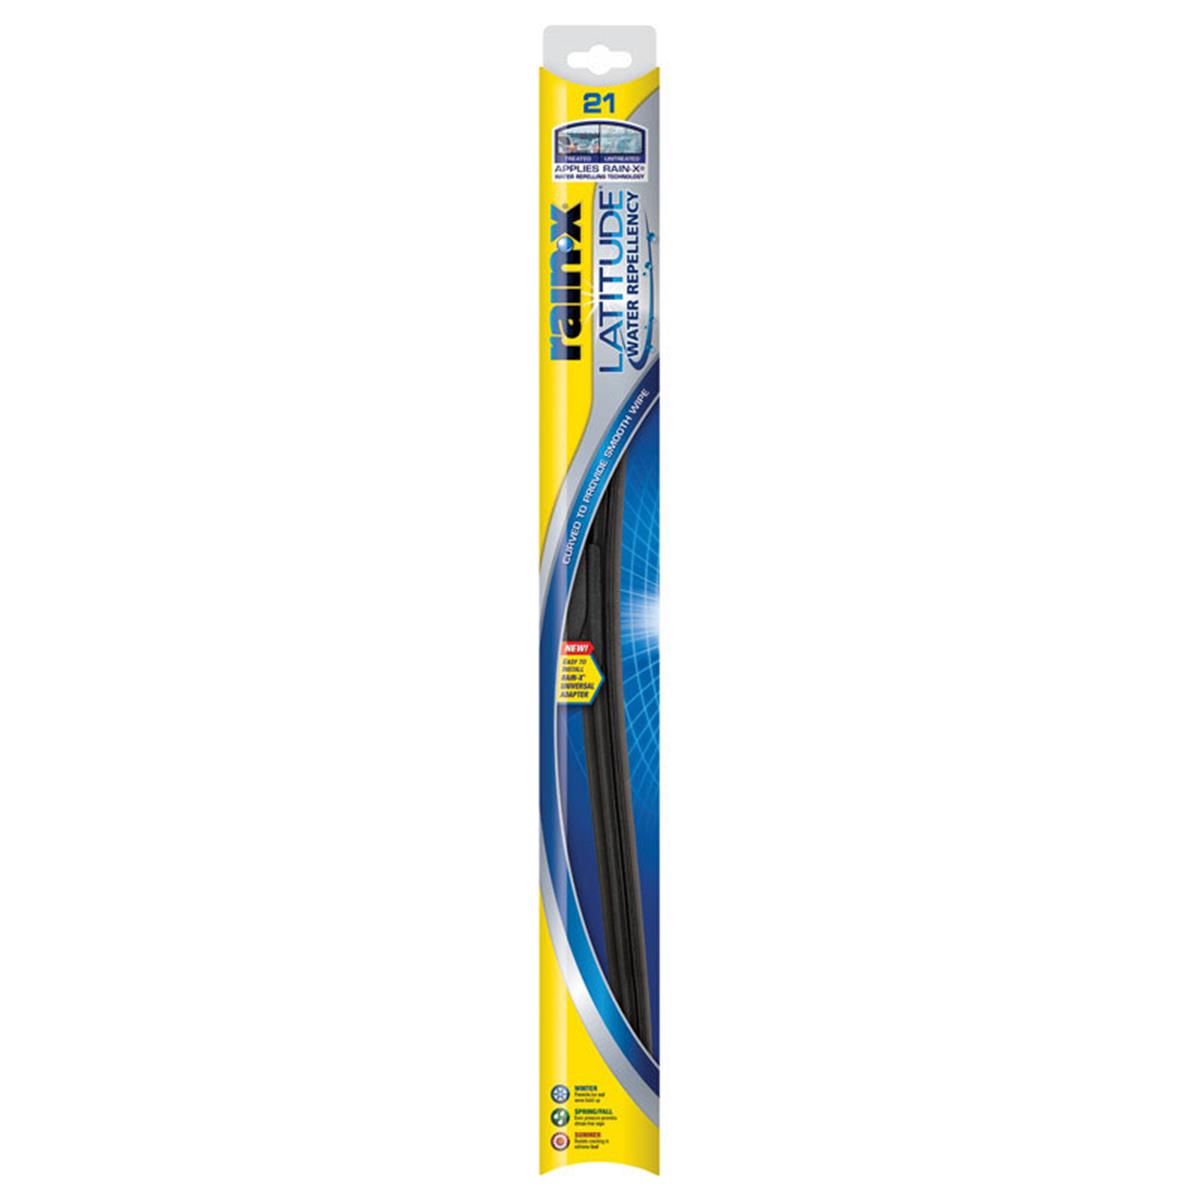 Picture of Itw Global Brands 5079278-2 21 in. Rain-X Latitude Wiper Blade